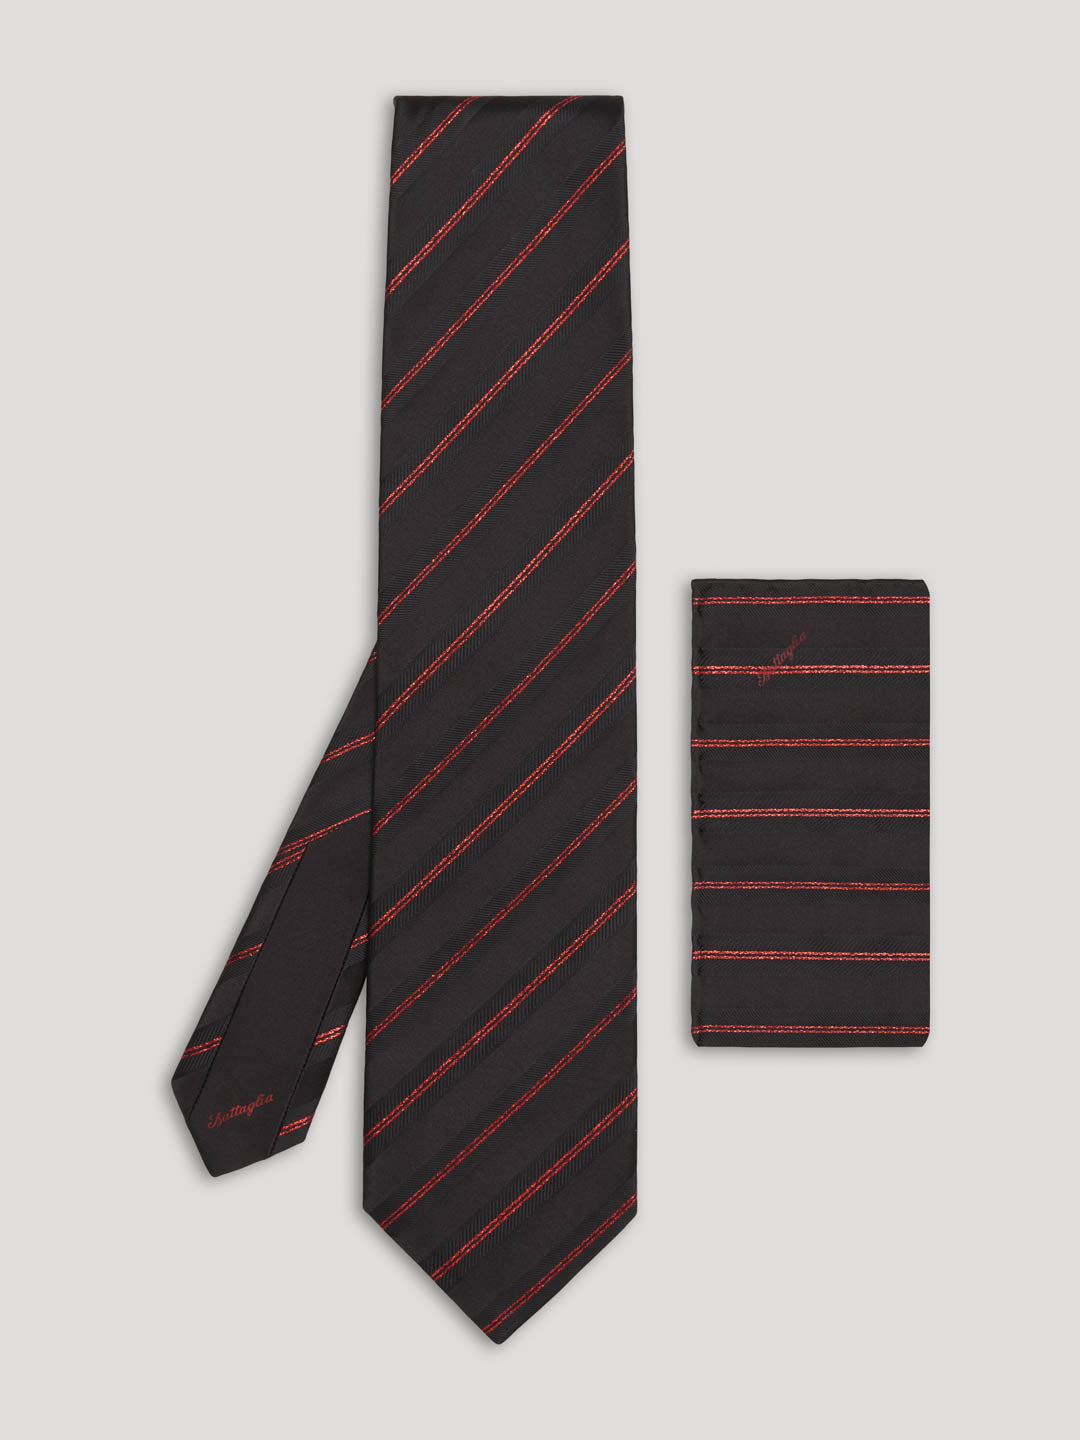 Black tie with red stripes and matching handkerchief. 